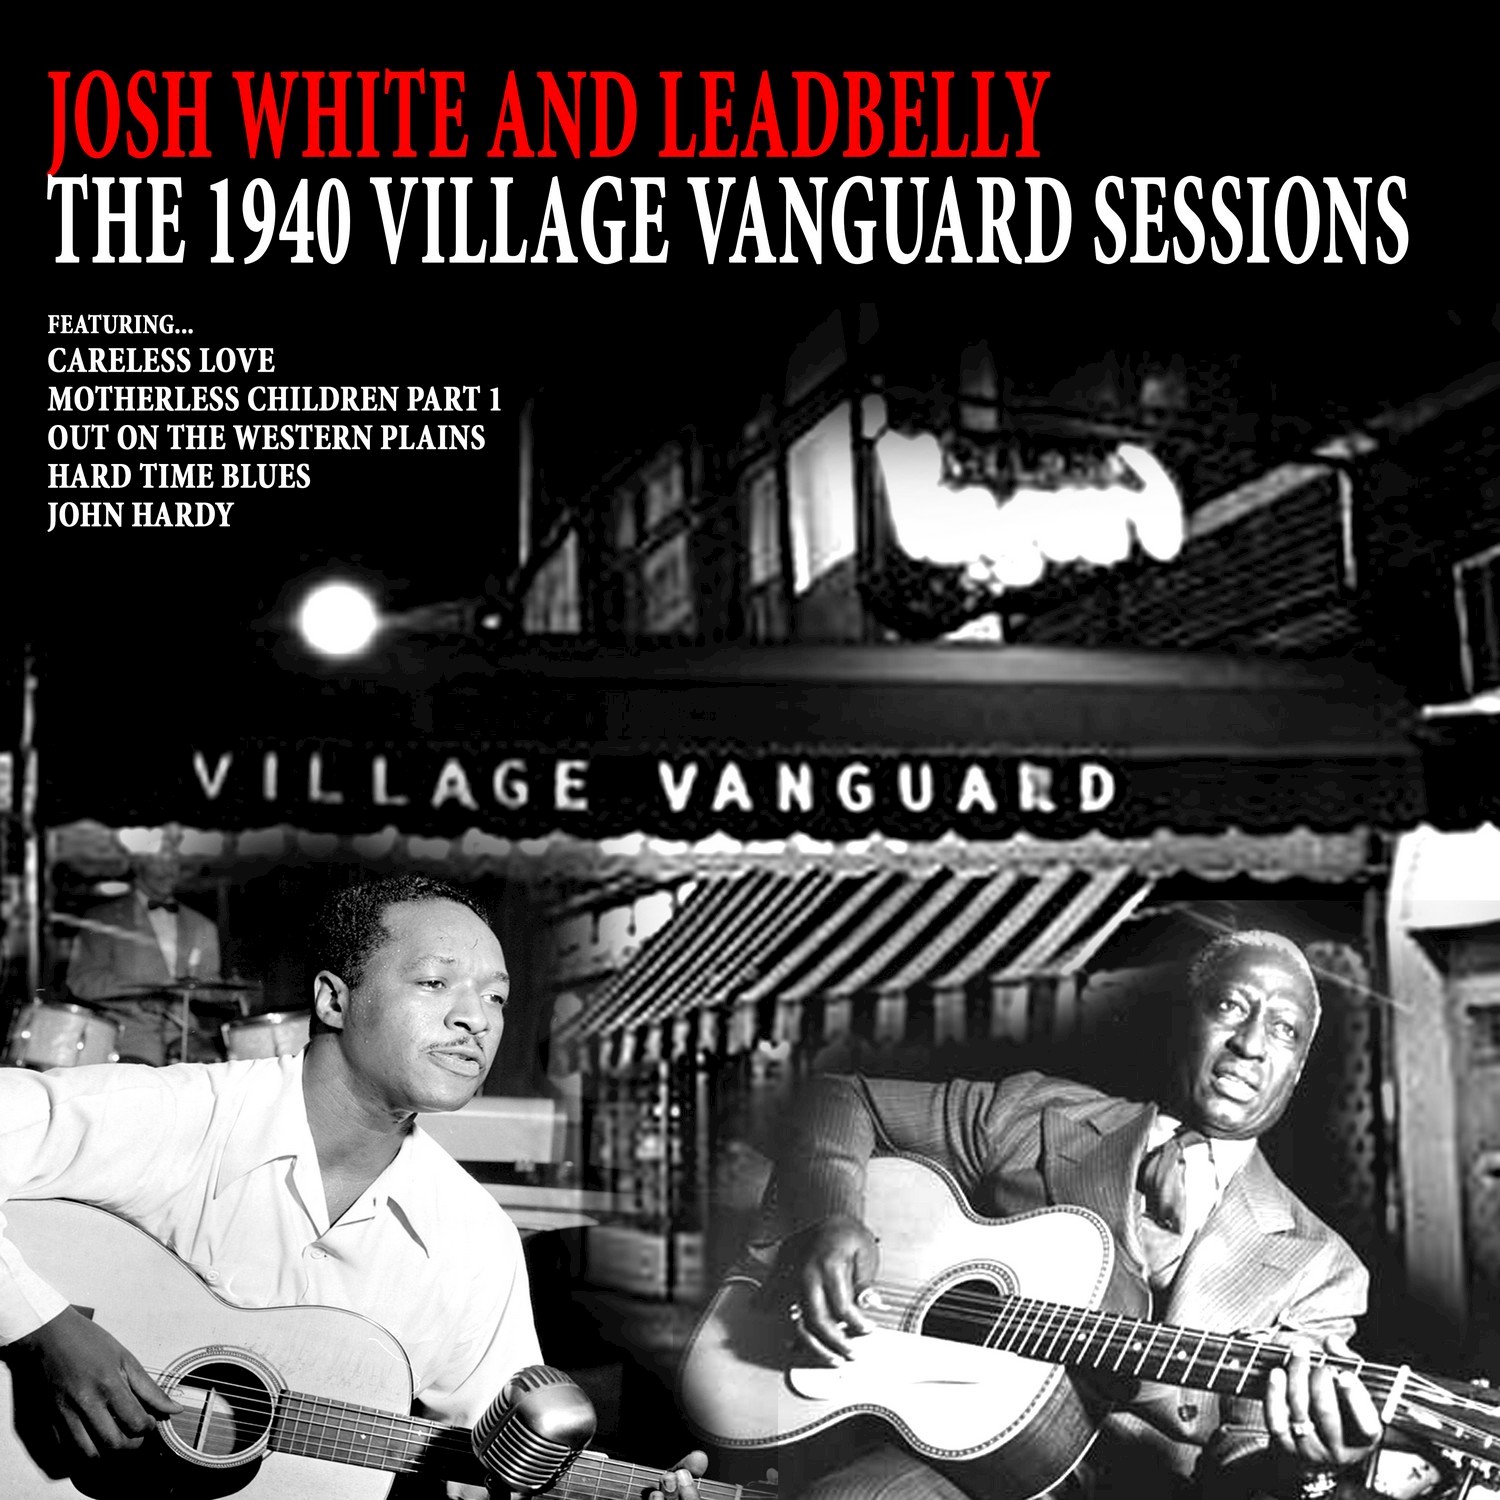 Josh White and Leadbelly: The 1940 Village Vanguard Sessions